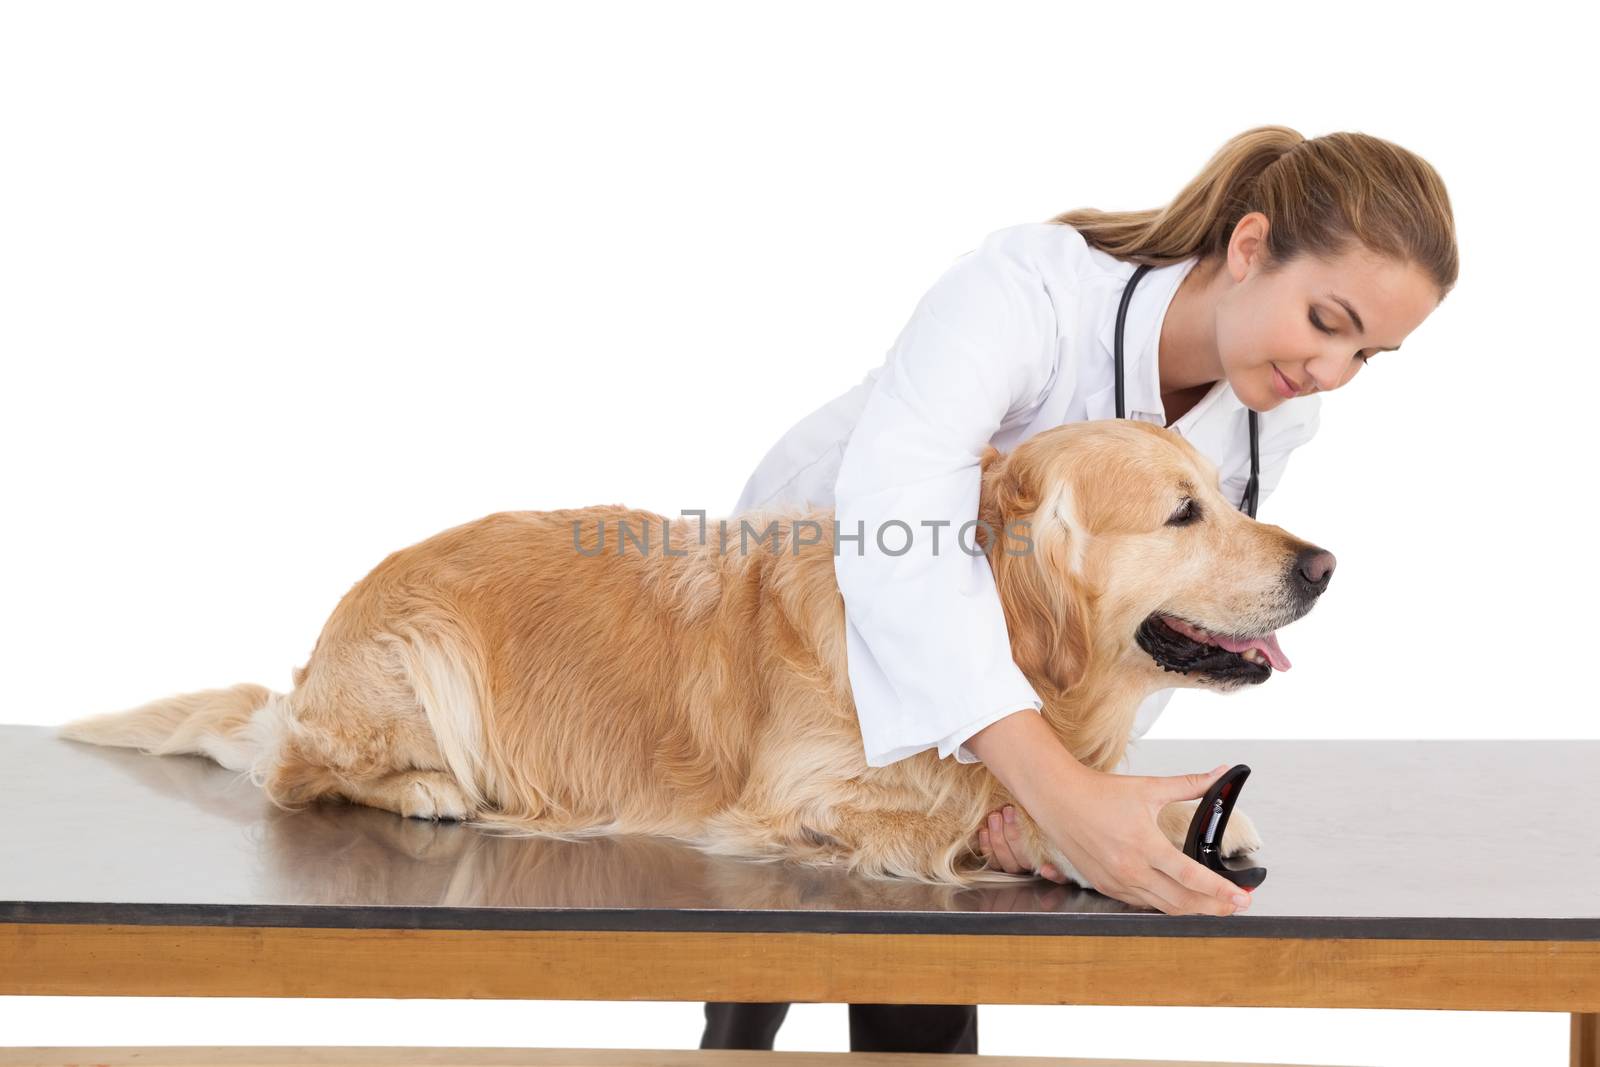 Vet clipping a labradors nails on white background